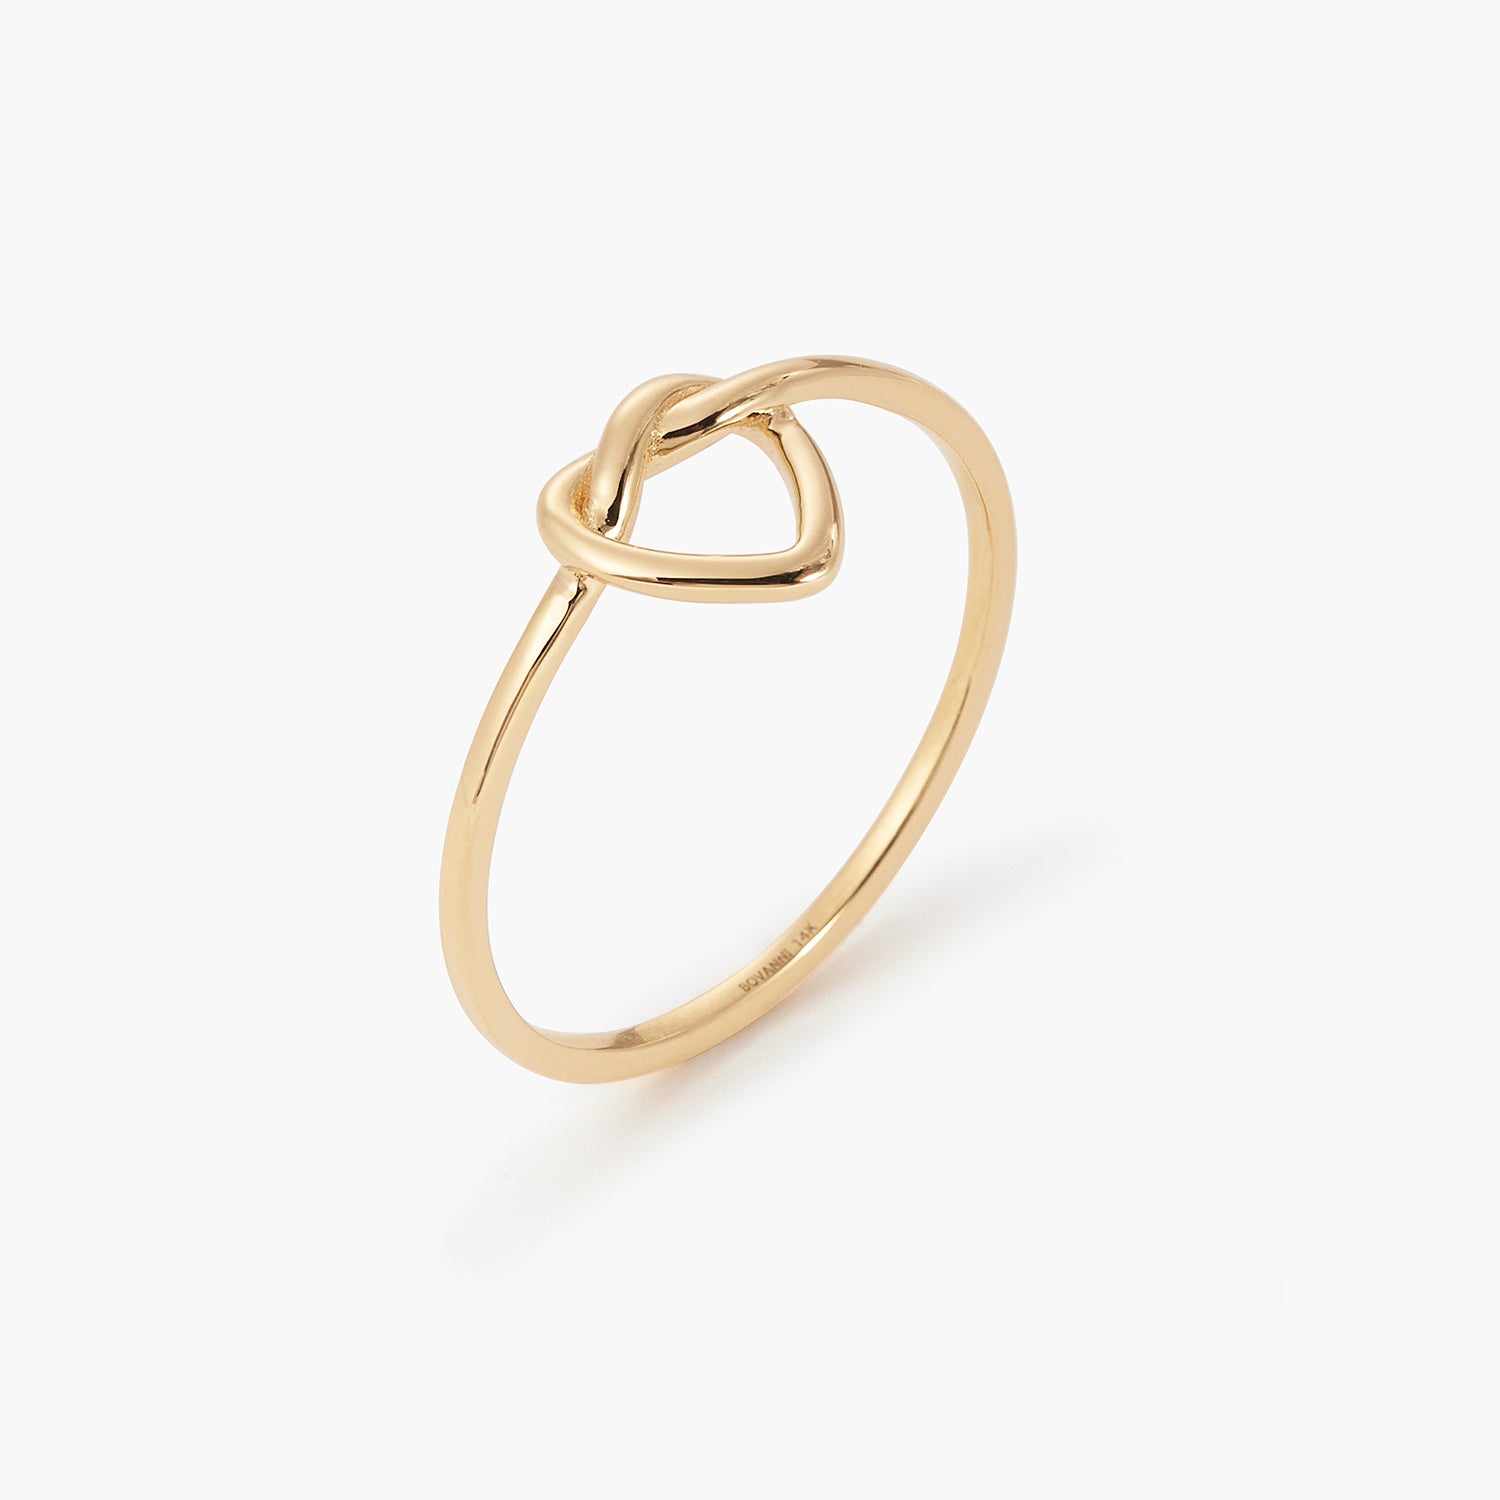 14K Solid Gold Ring, Thin Simple Band Ring, Knot Ornament, Infinity Ri –  tinytinygold